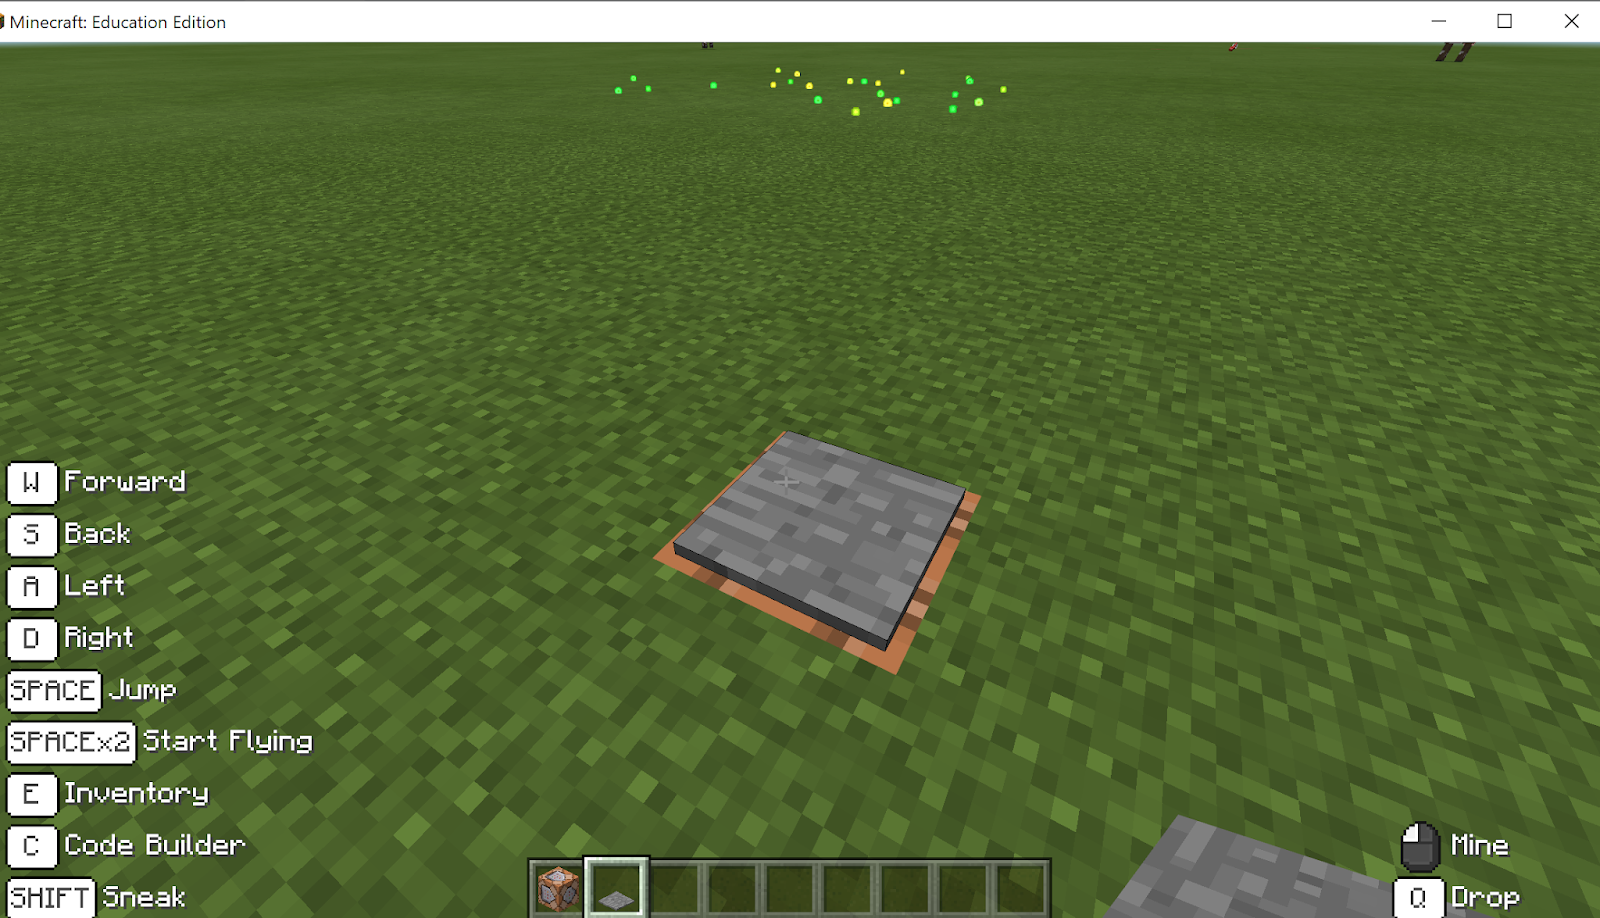 Games and Learning: Using functions in Minecraft (Education